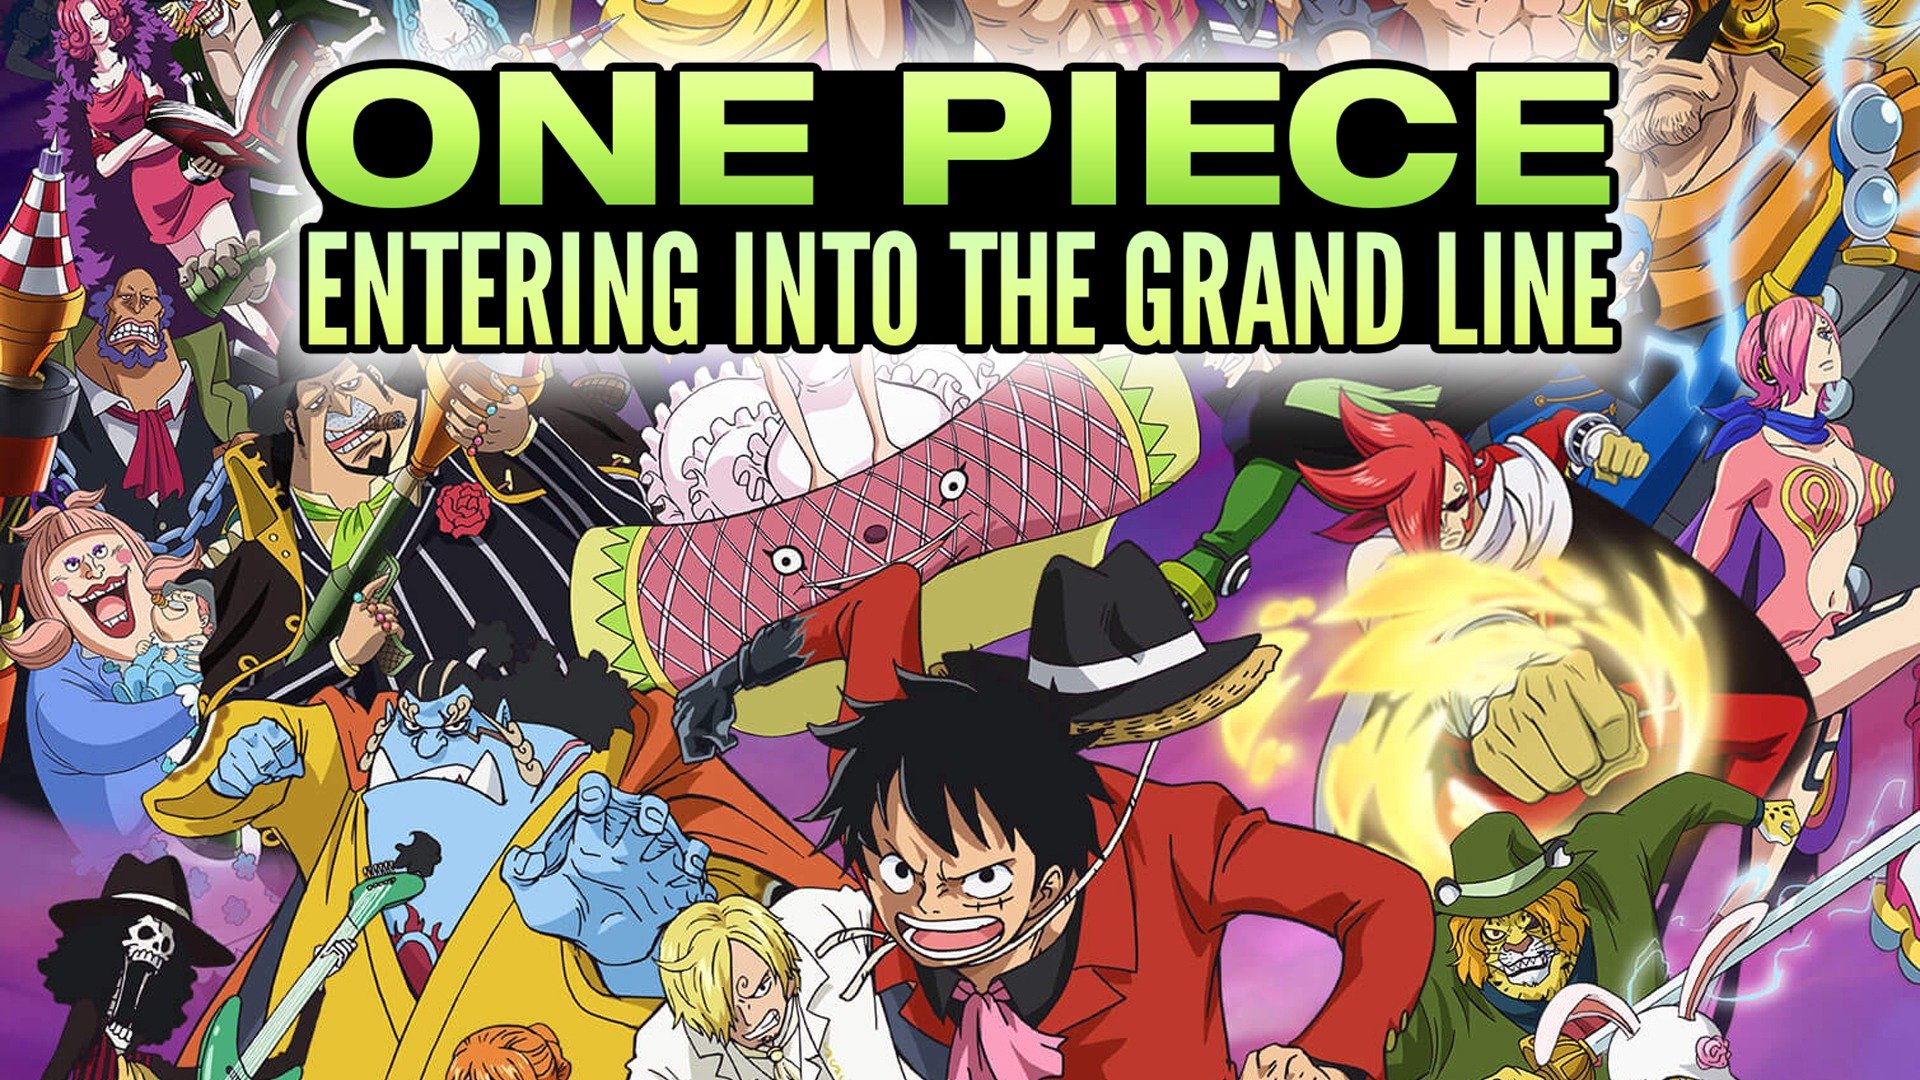 One Piece Wallpaper: Going To The Grand Line - Minitokyo